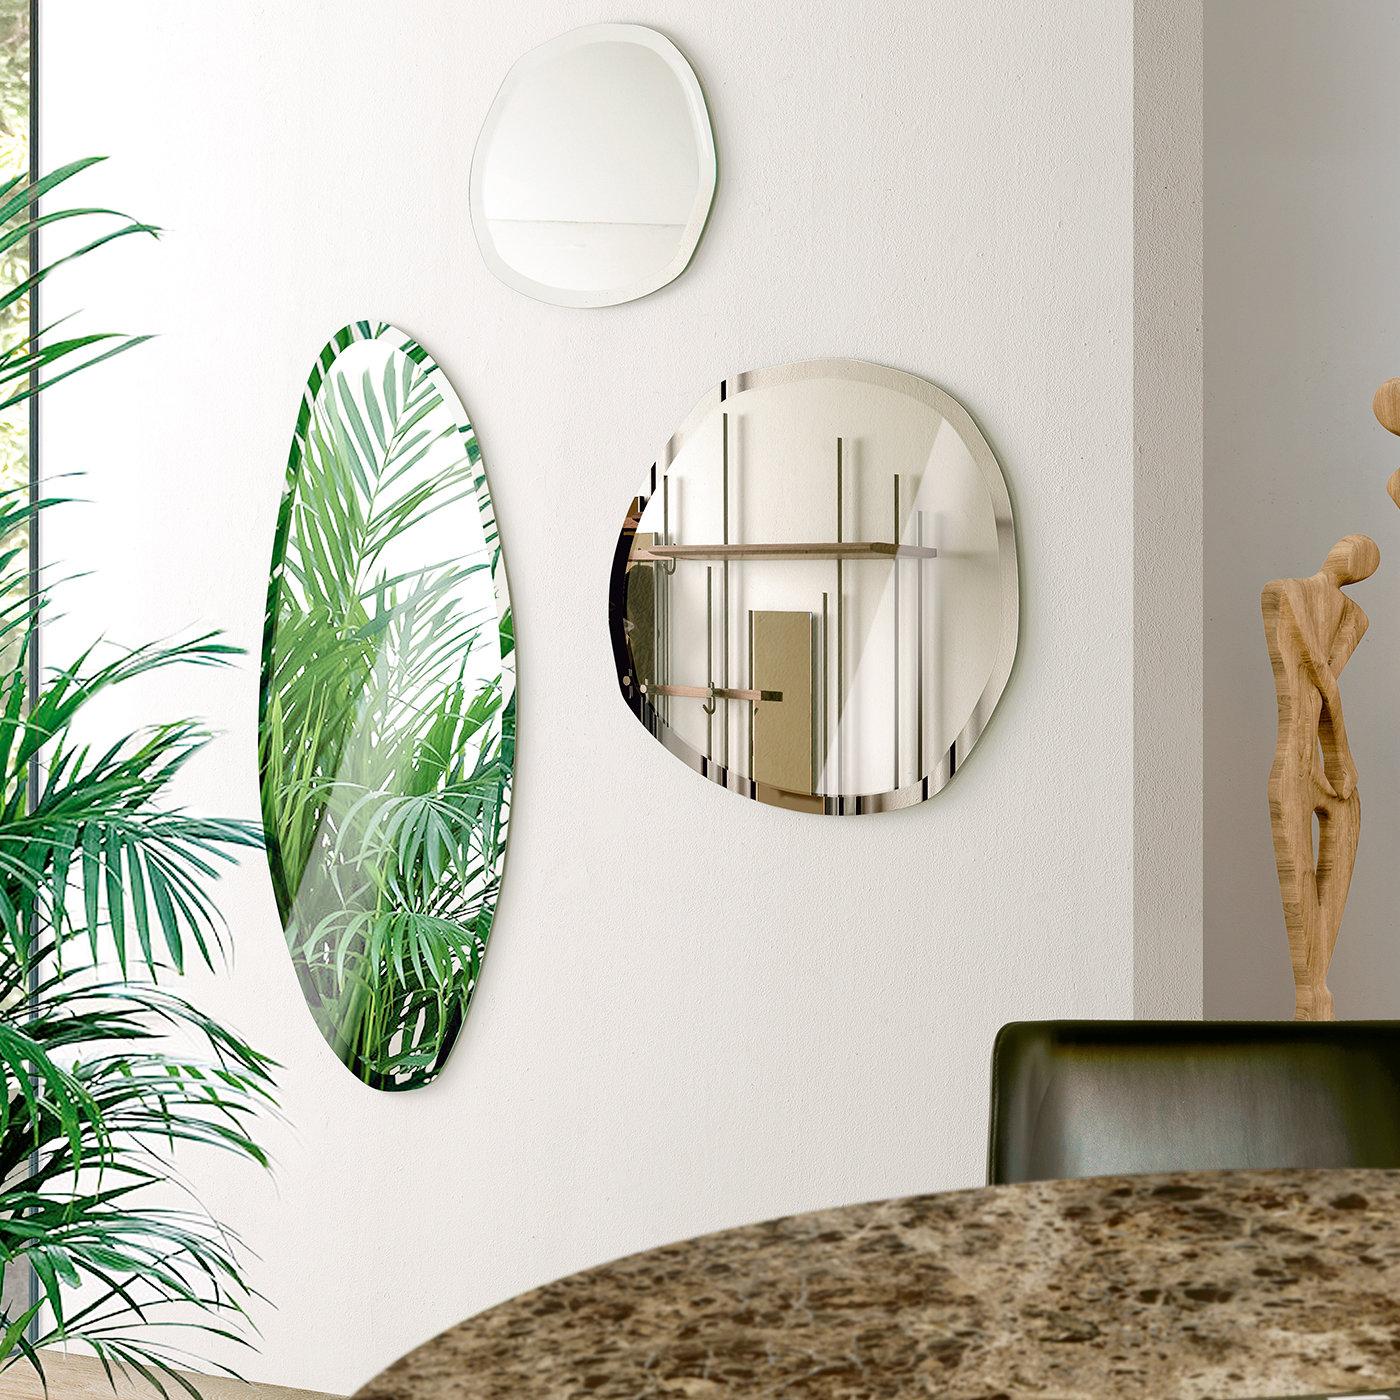 Defined by a slender and irregular shape, this stunning wall mirror by Norberto Delfinetti celebrates the organic charm of natural stone. The mirror is available in a natural or bronzed finish, and it is bordered by several beveled edges, designed